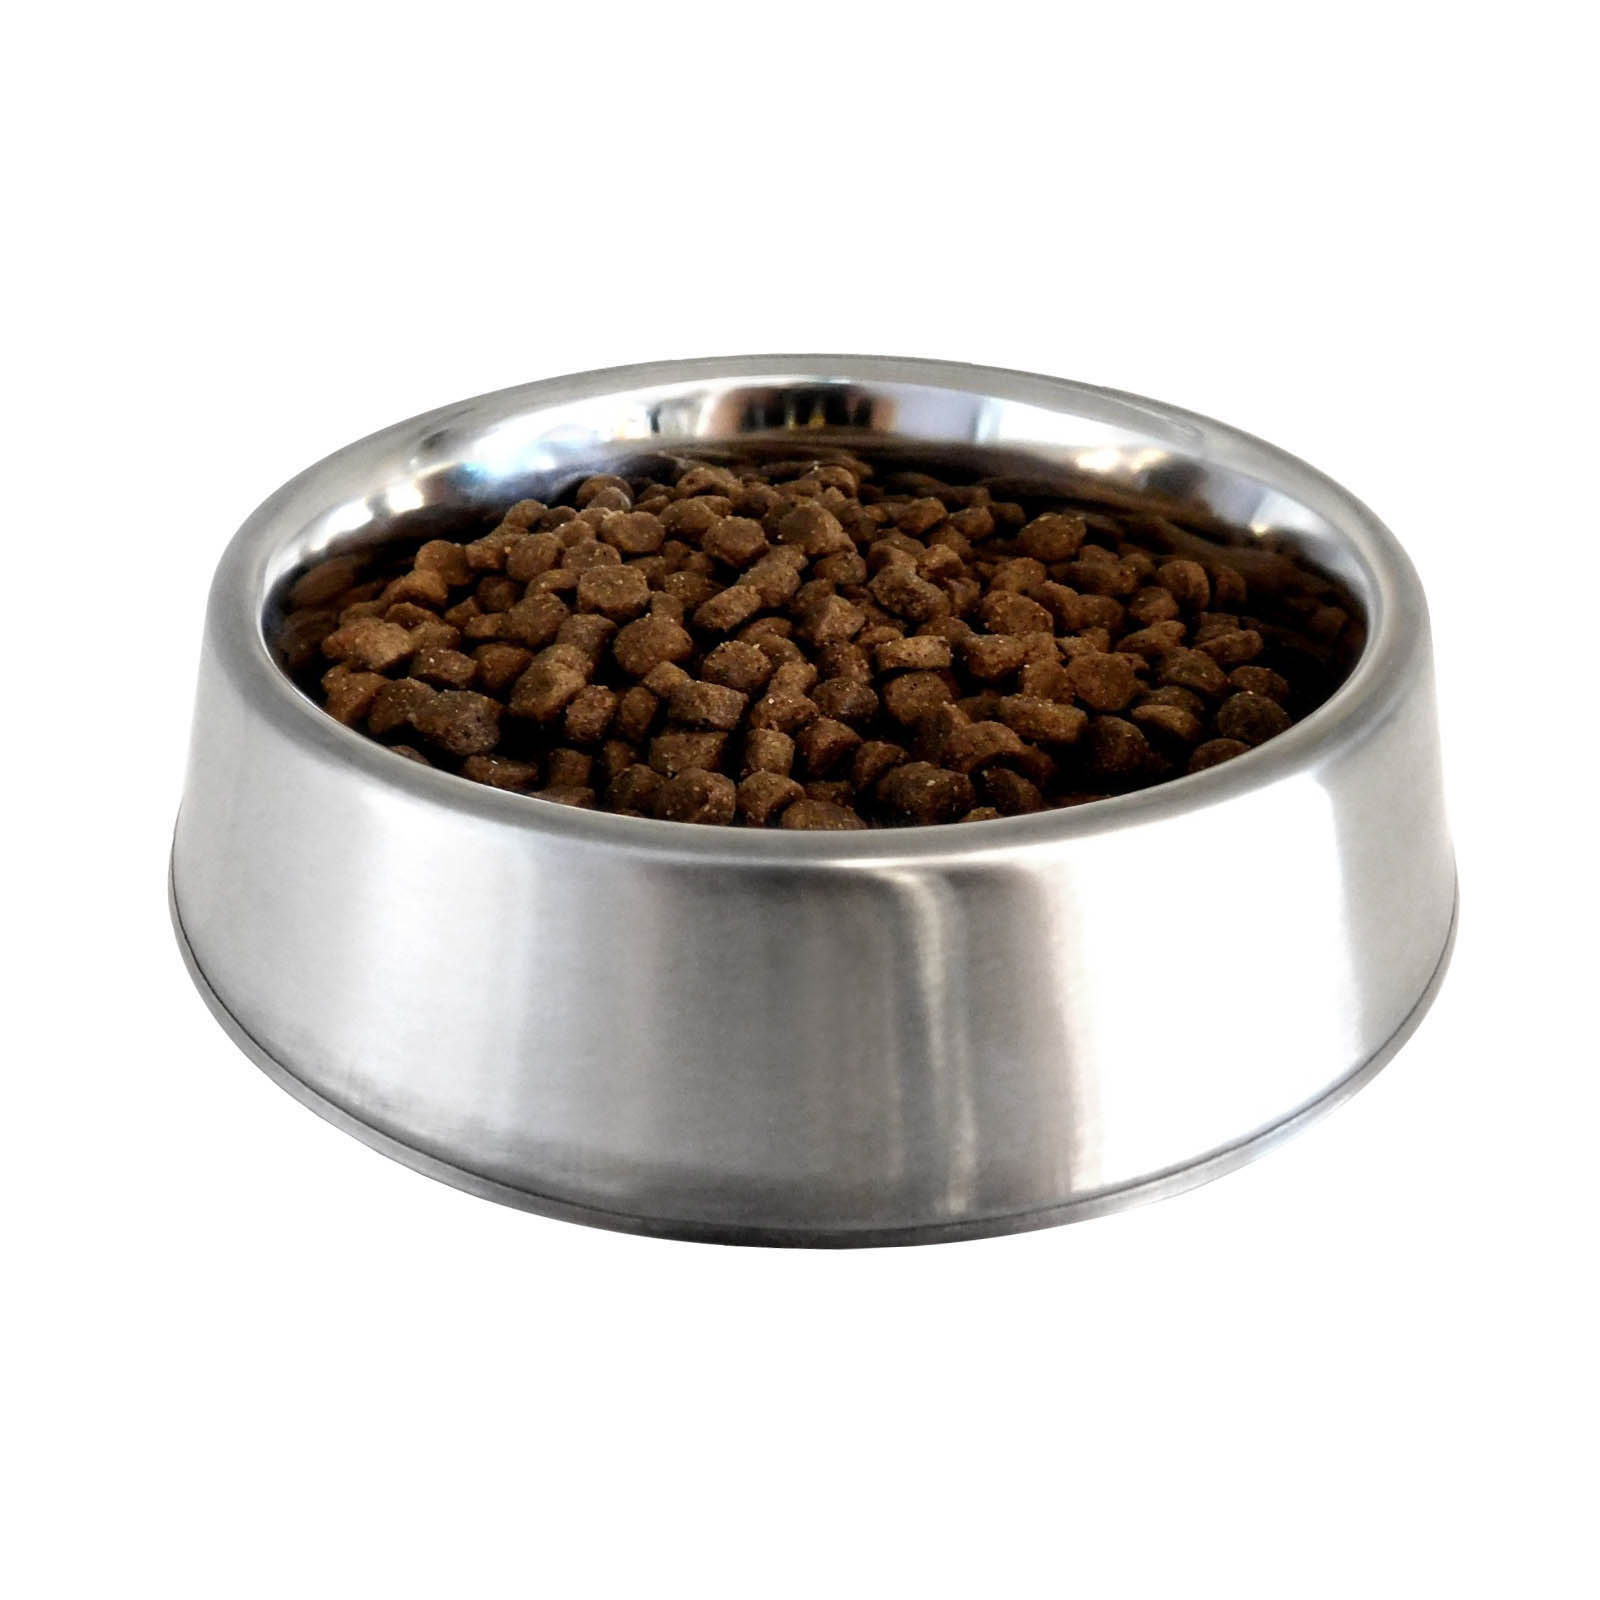 Ant-Free Stainless Steel Pet Food Bowl image 0